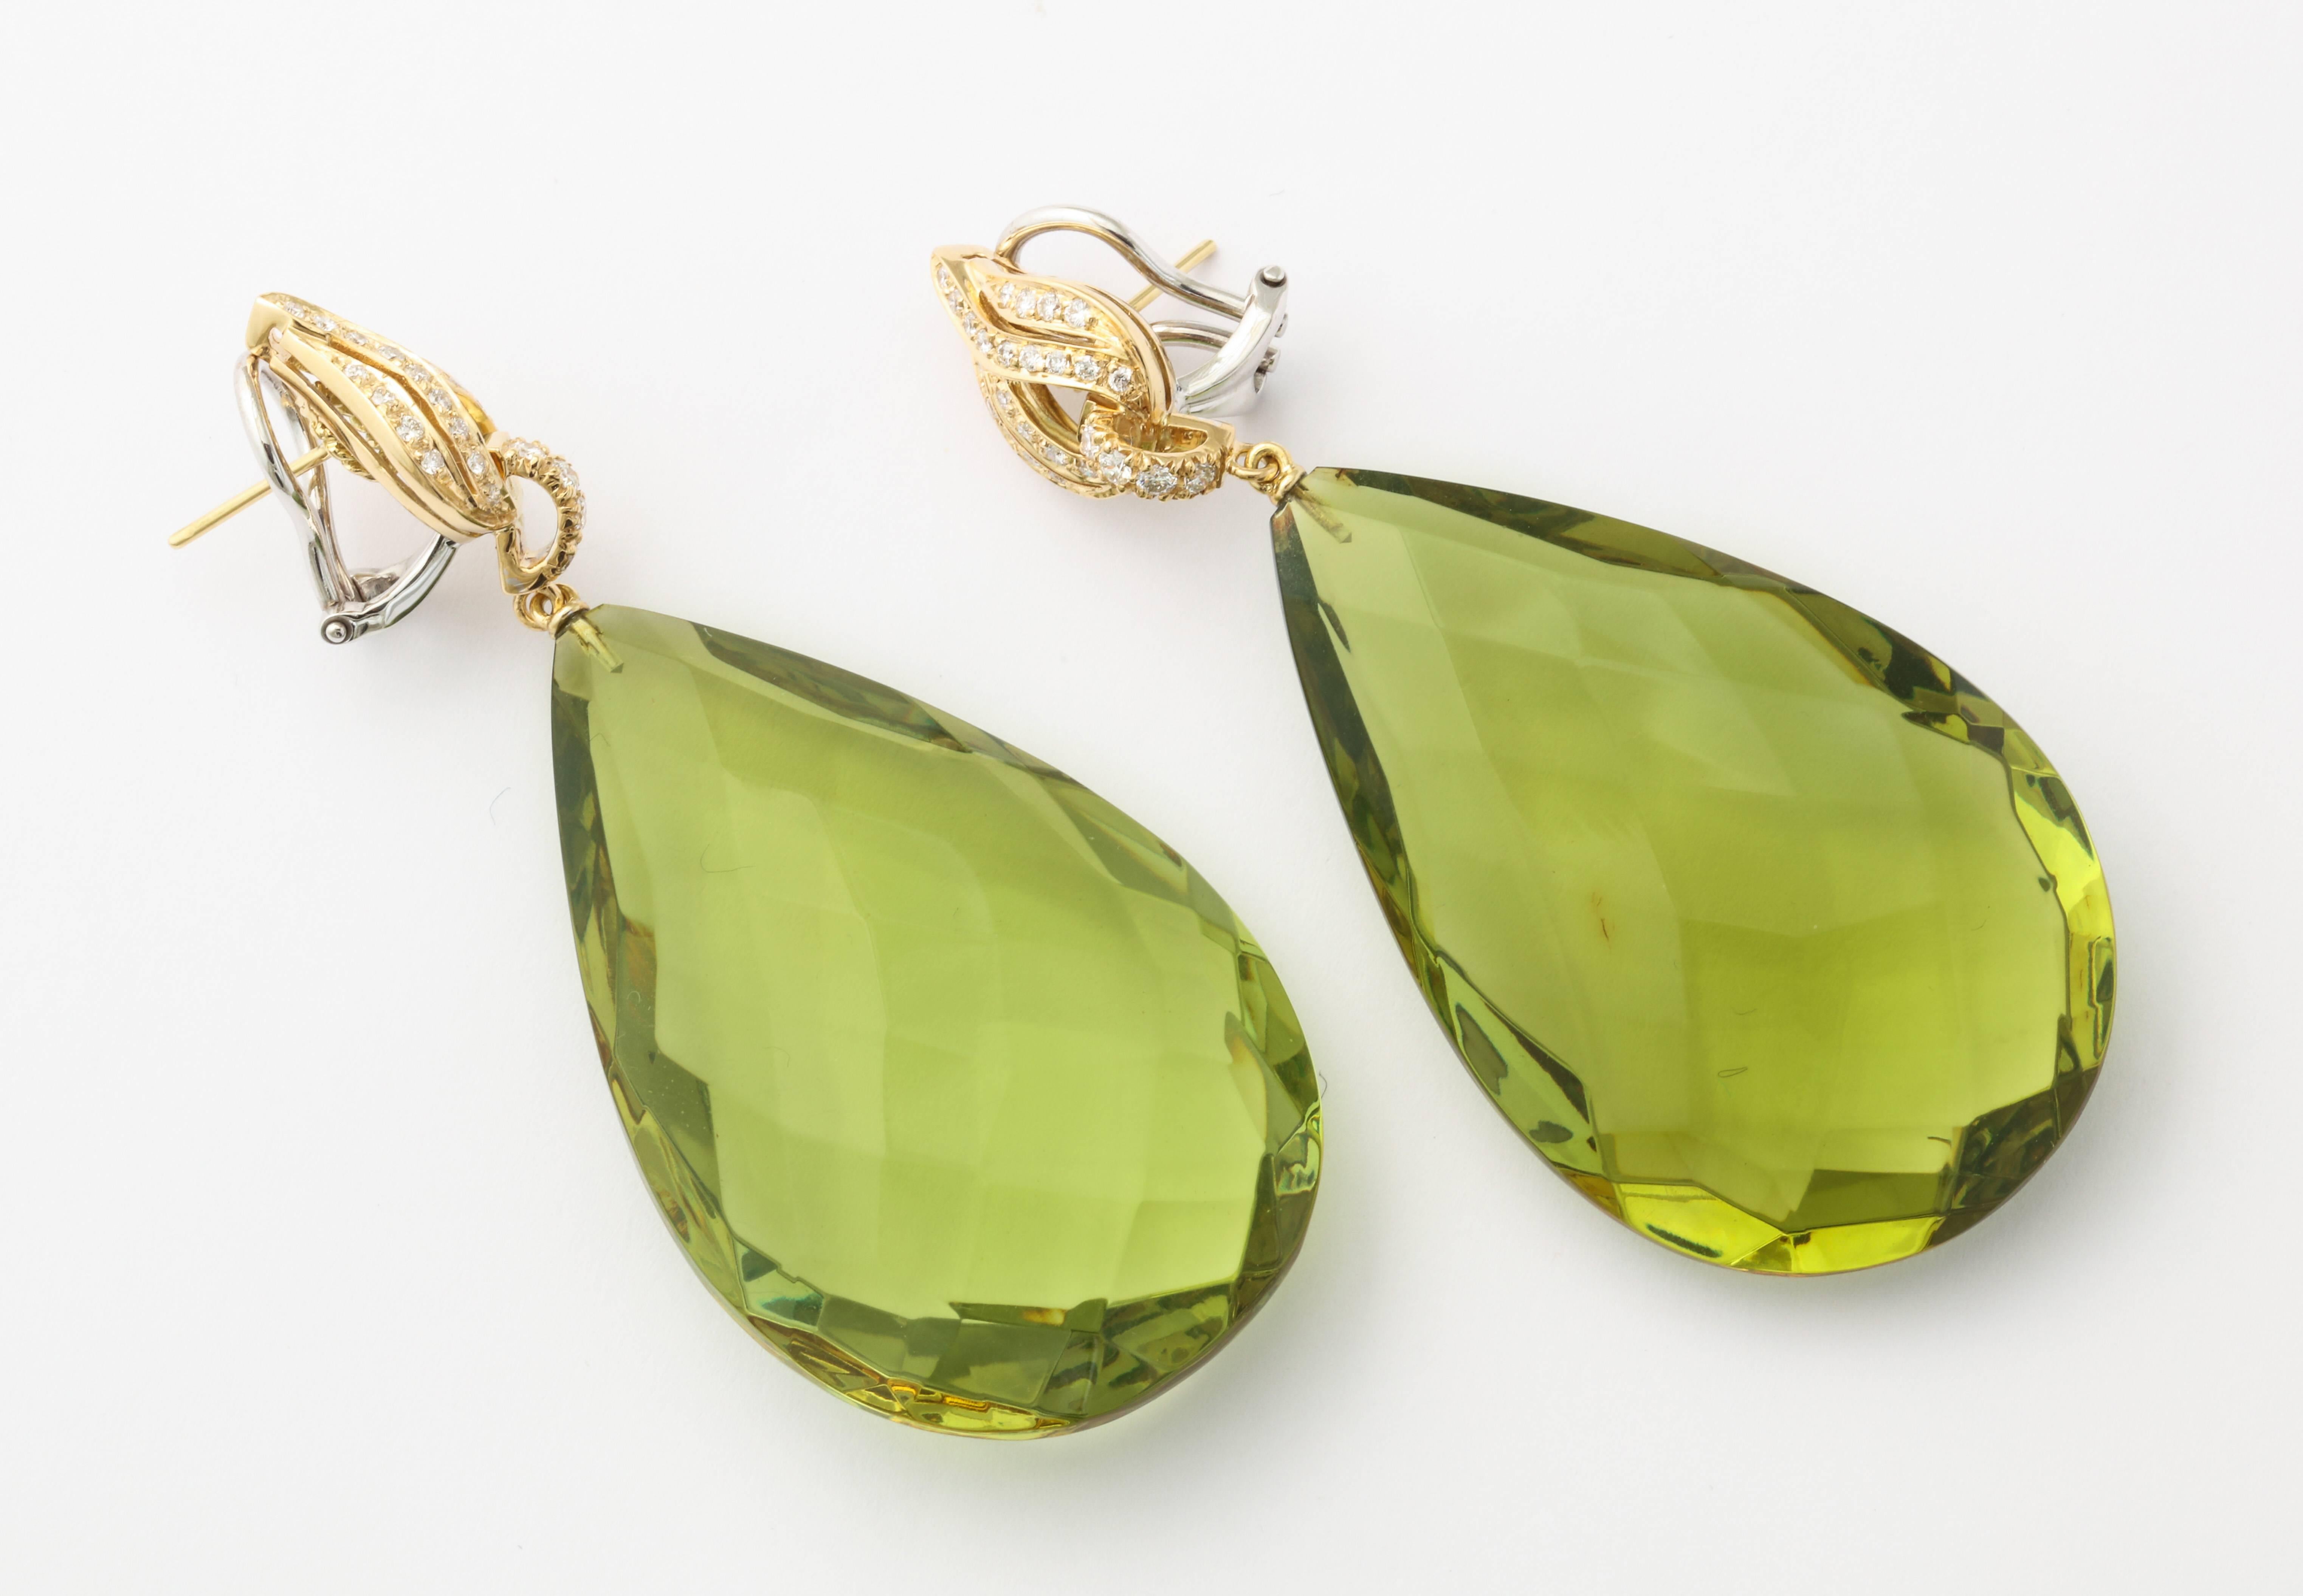 At a full two inches long and just over an inch wide, these spectacular earrings are true showstoppers.  The impressive size remains comfortable thanks to the clever use of amber for the drops.  As opposed to a stone which could have been used,